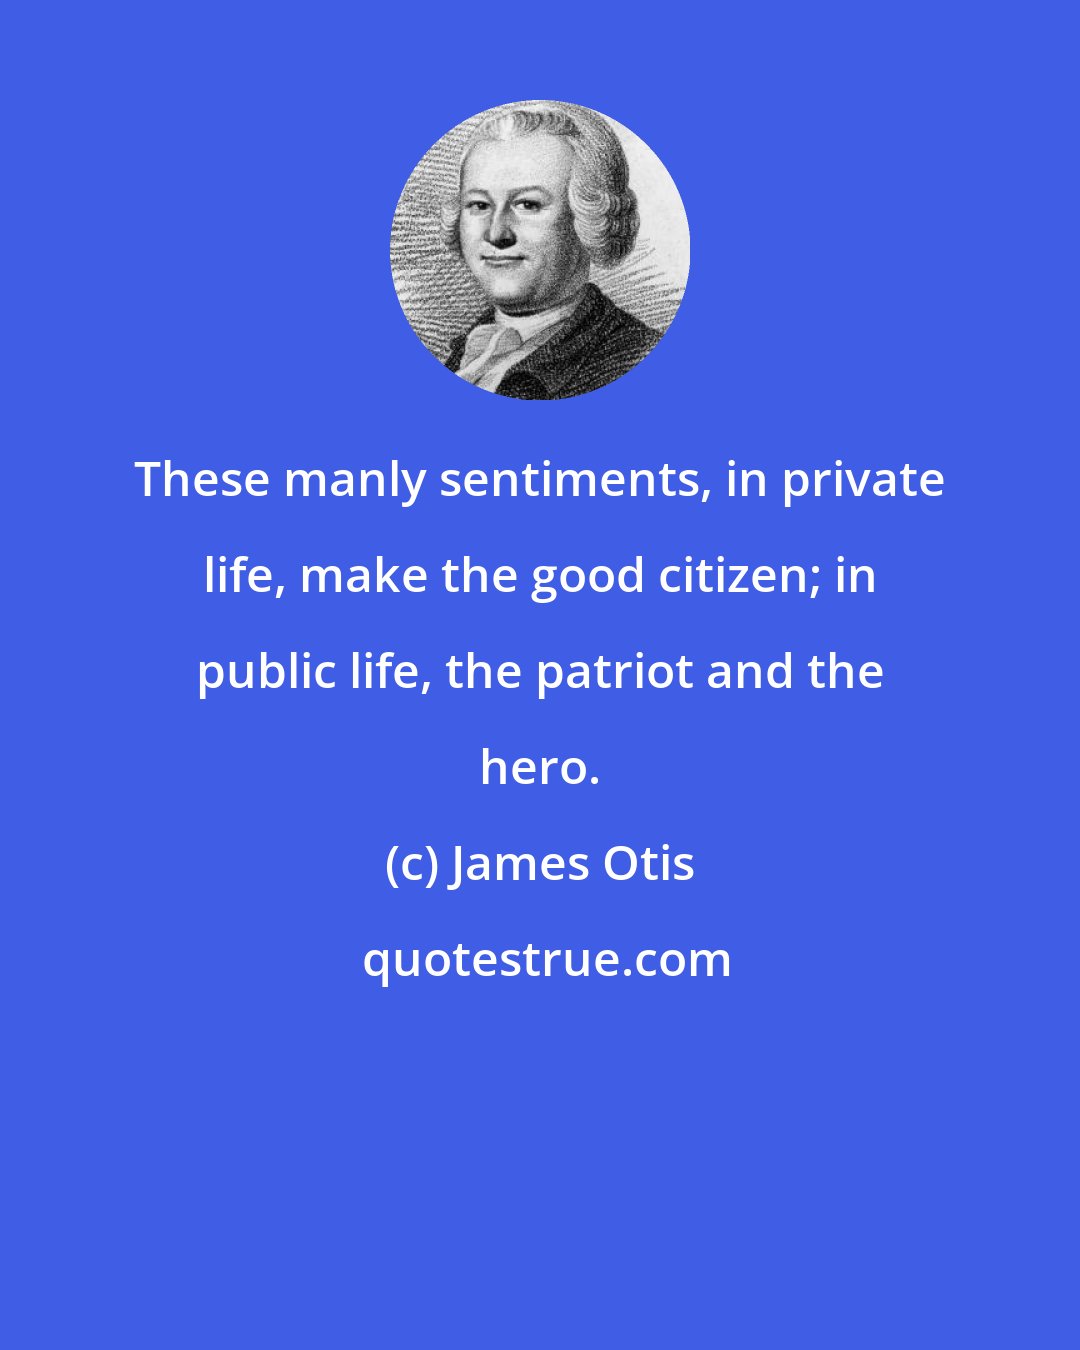 James Otis: These manly sentiments, in private life, make the good citizen; in public life, the patriot and the hero.